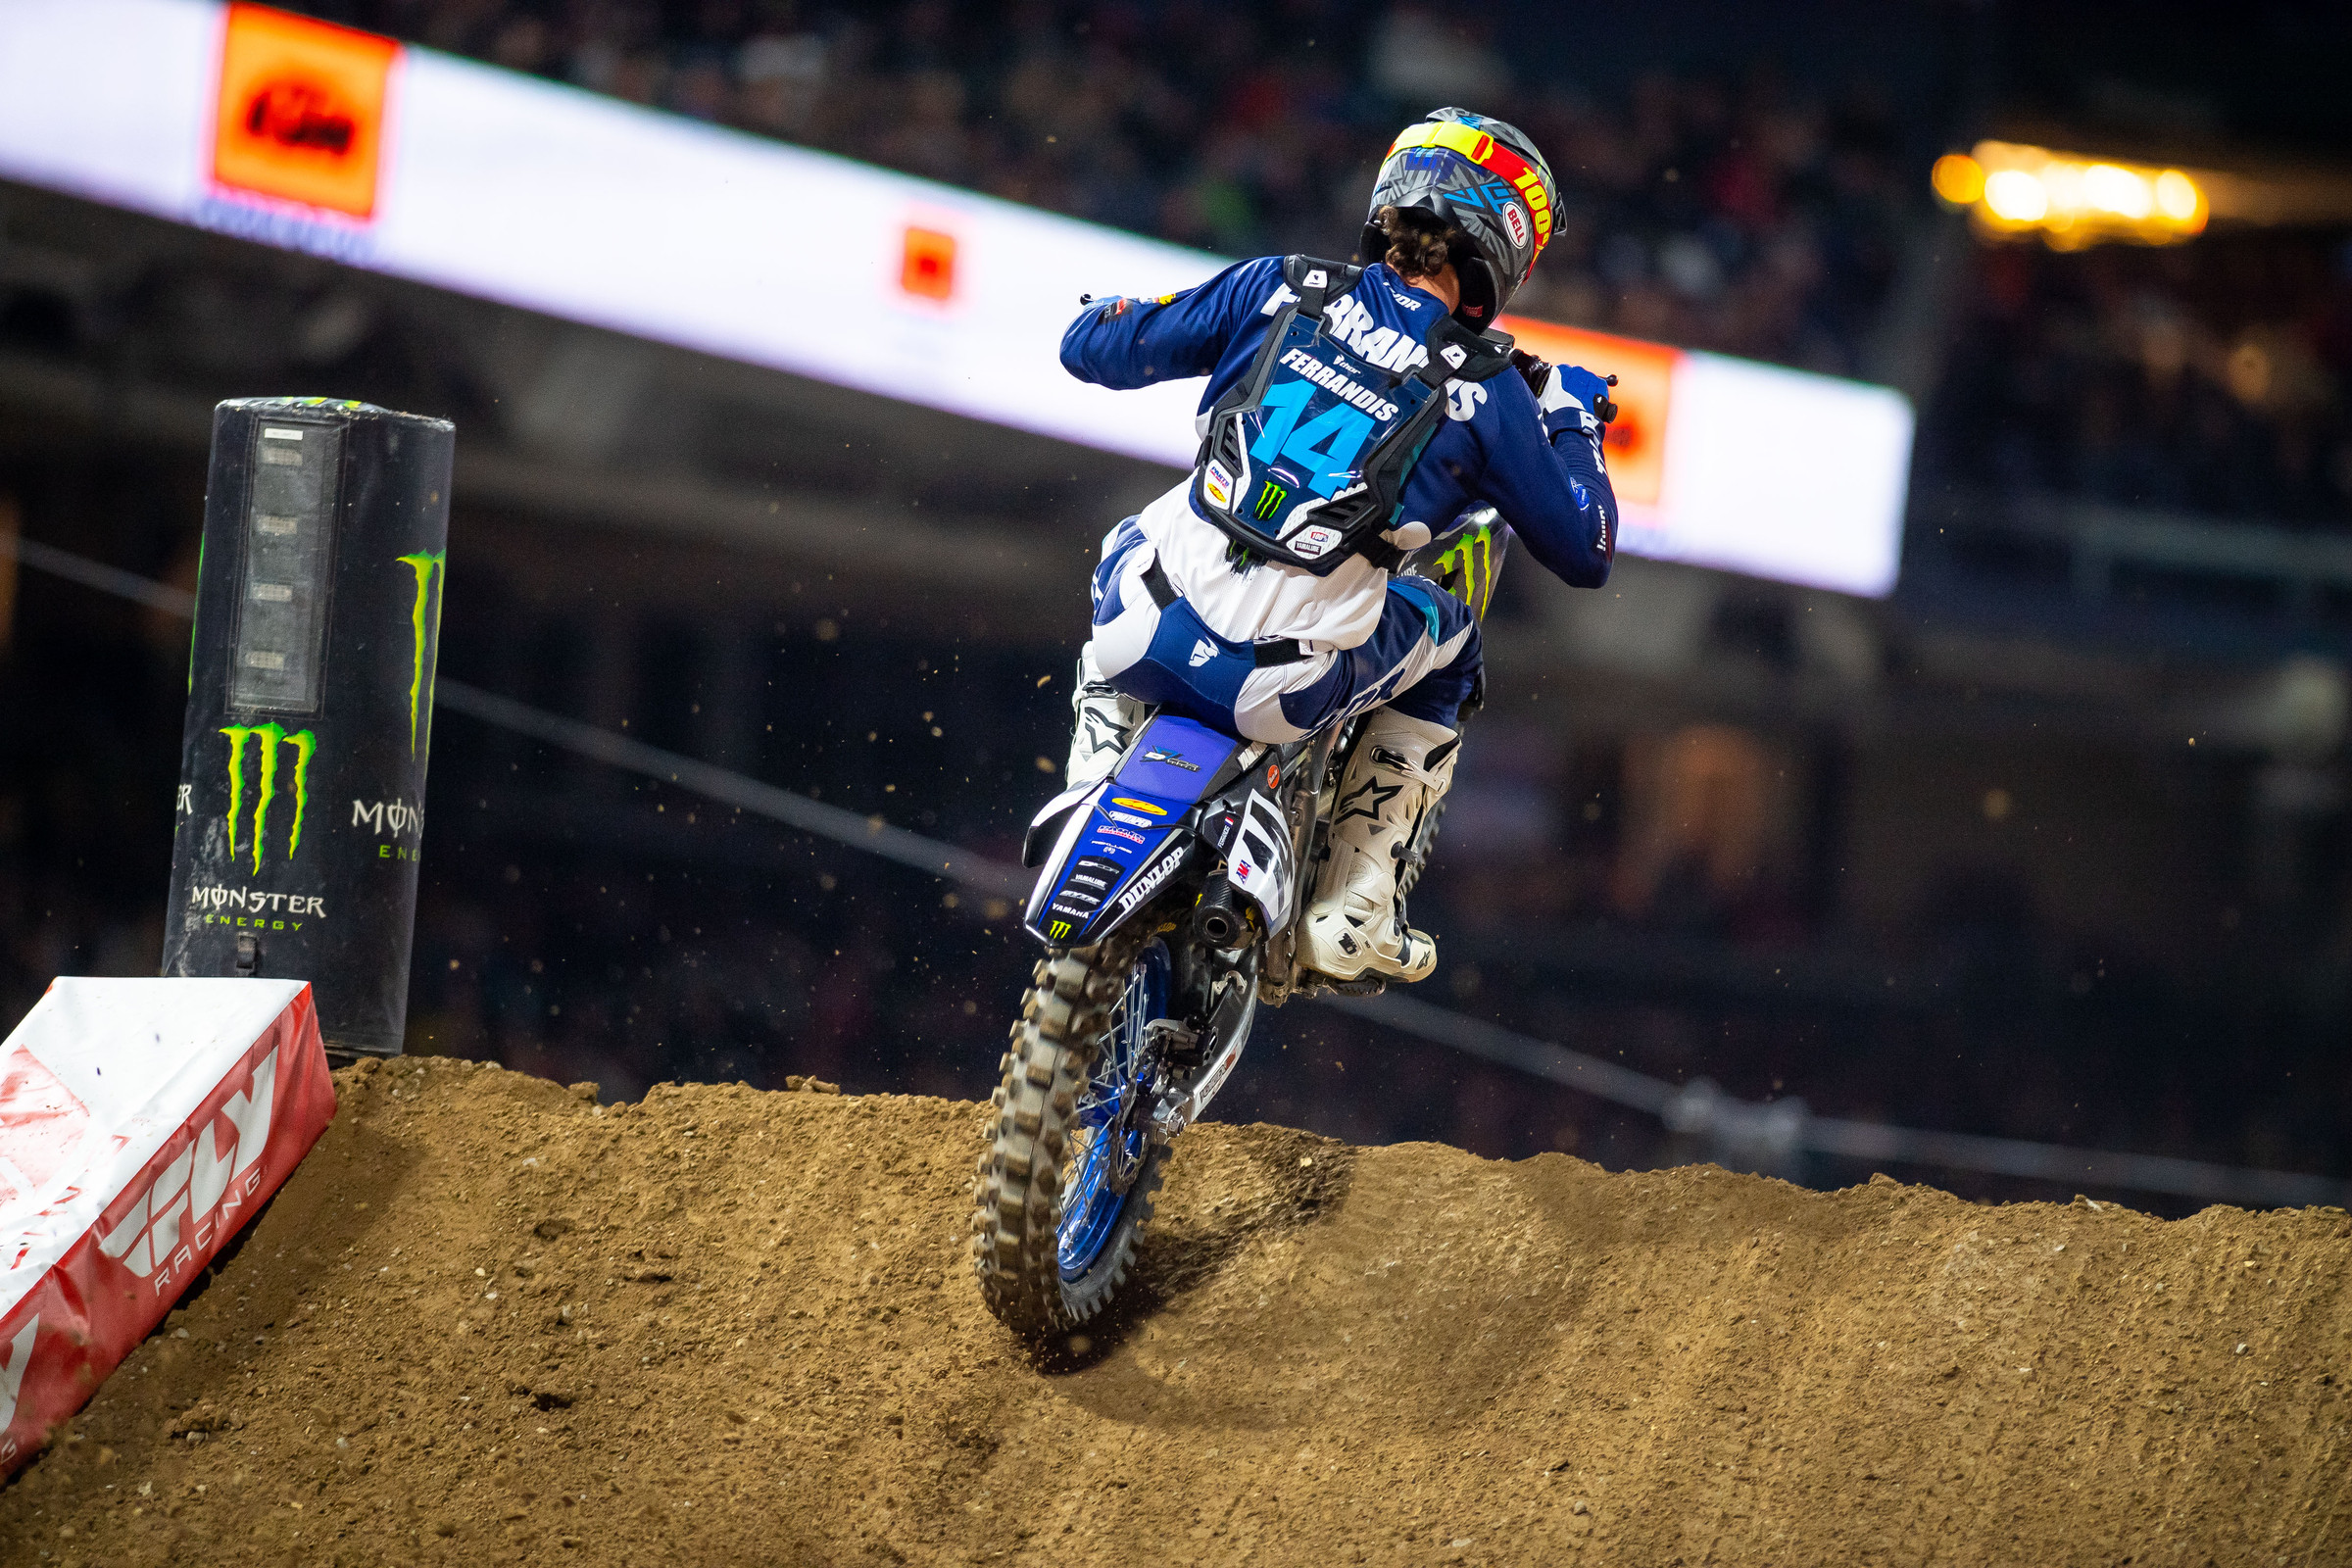 How to Stream and Watch 2022 Anaheim 2 Supercross on TV